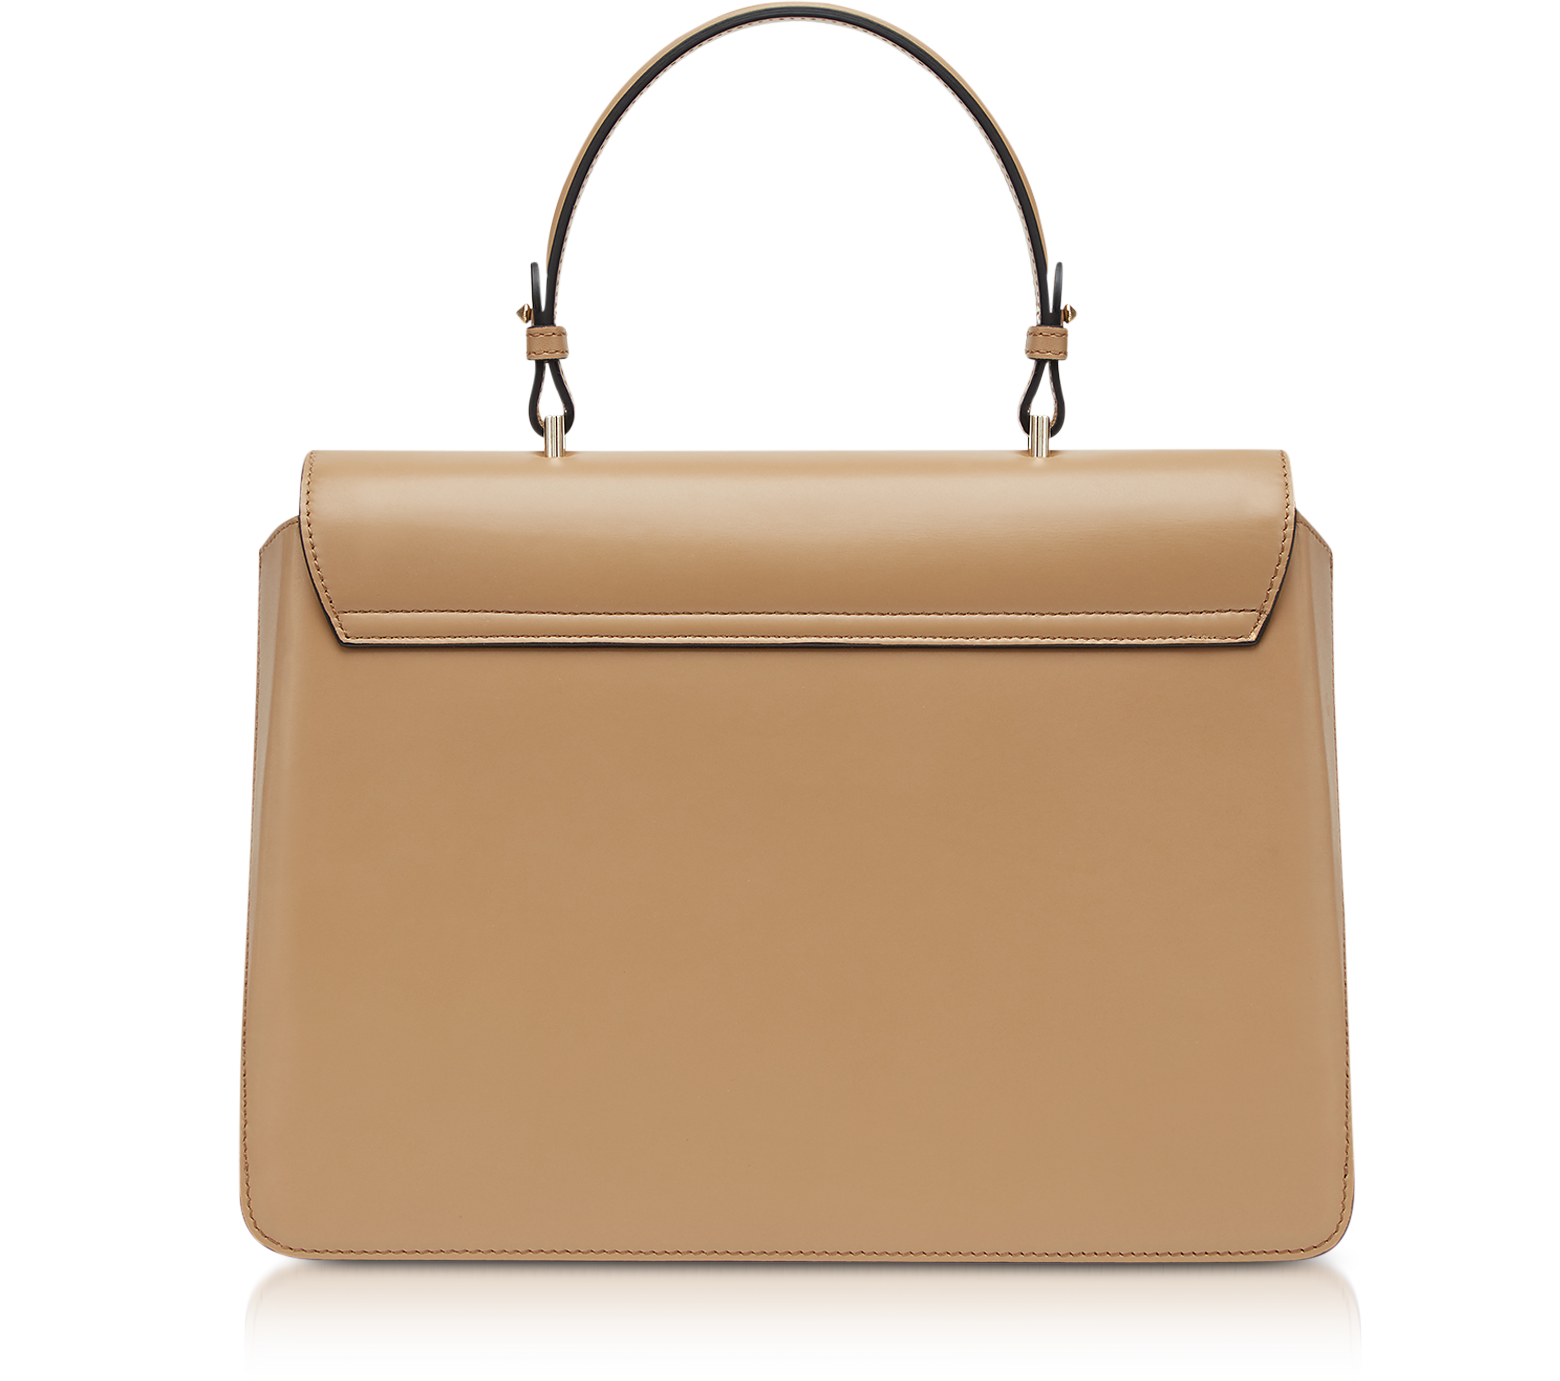 Versace Beige Leather Large DV One Top Handle Bag at FORZIERI